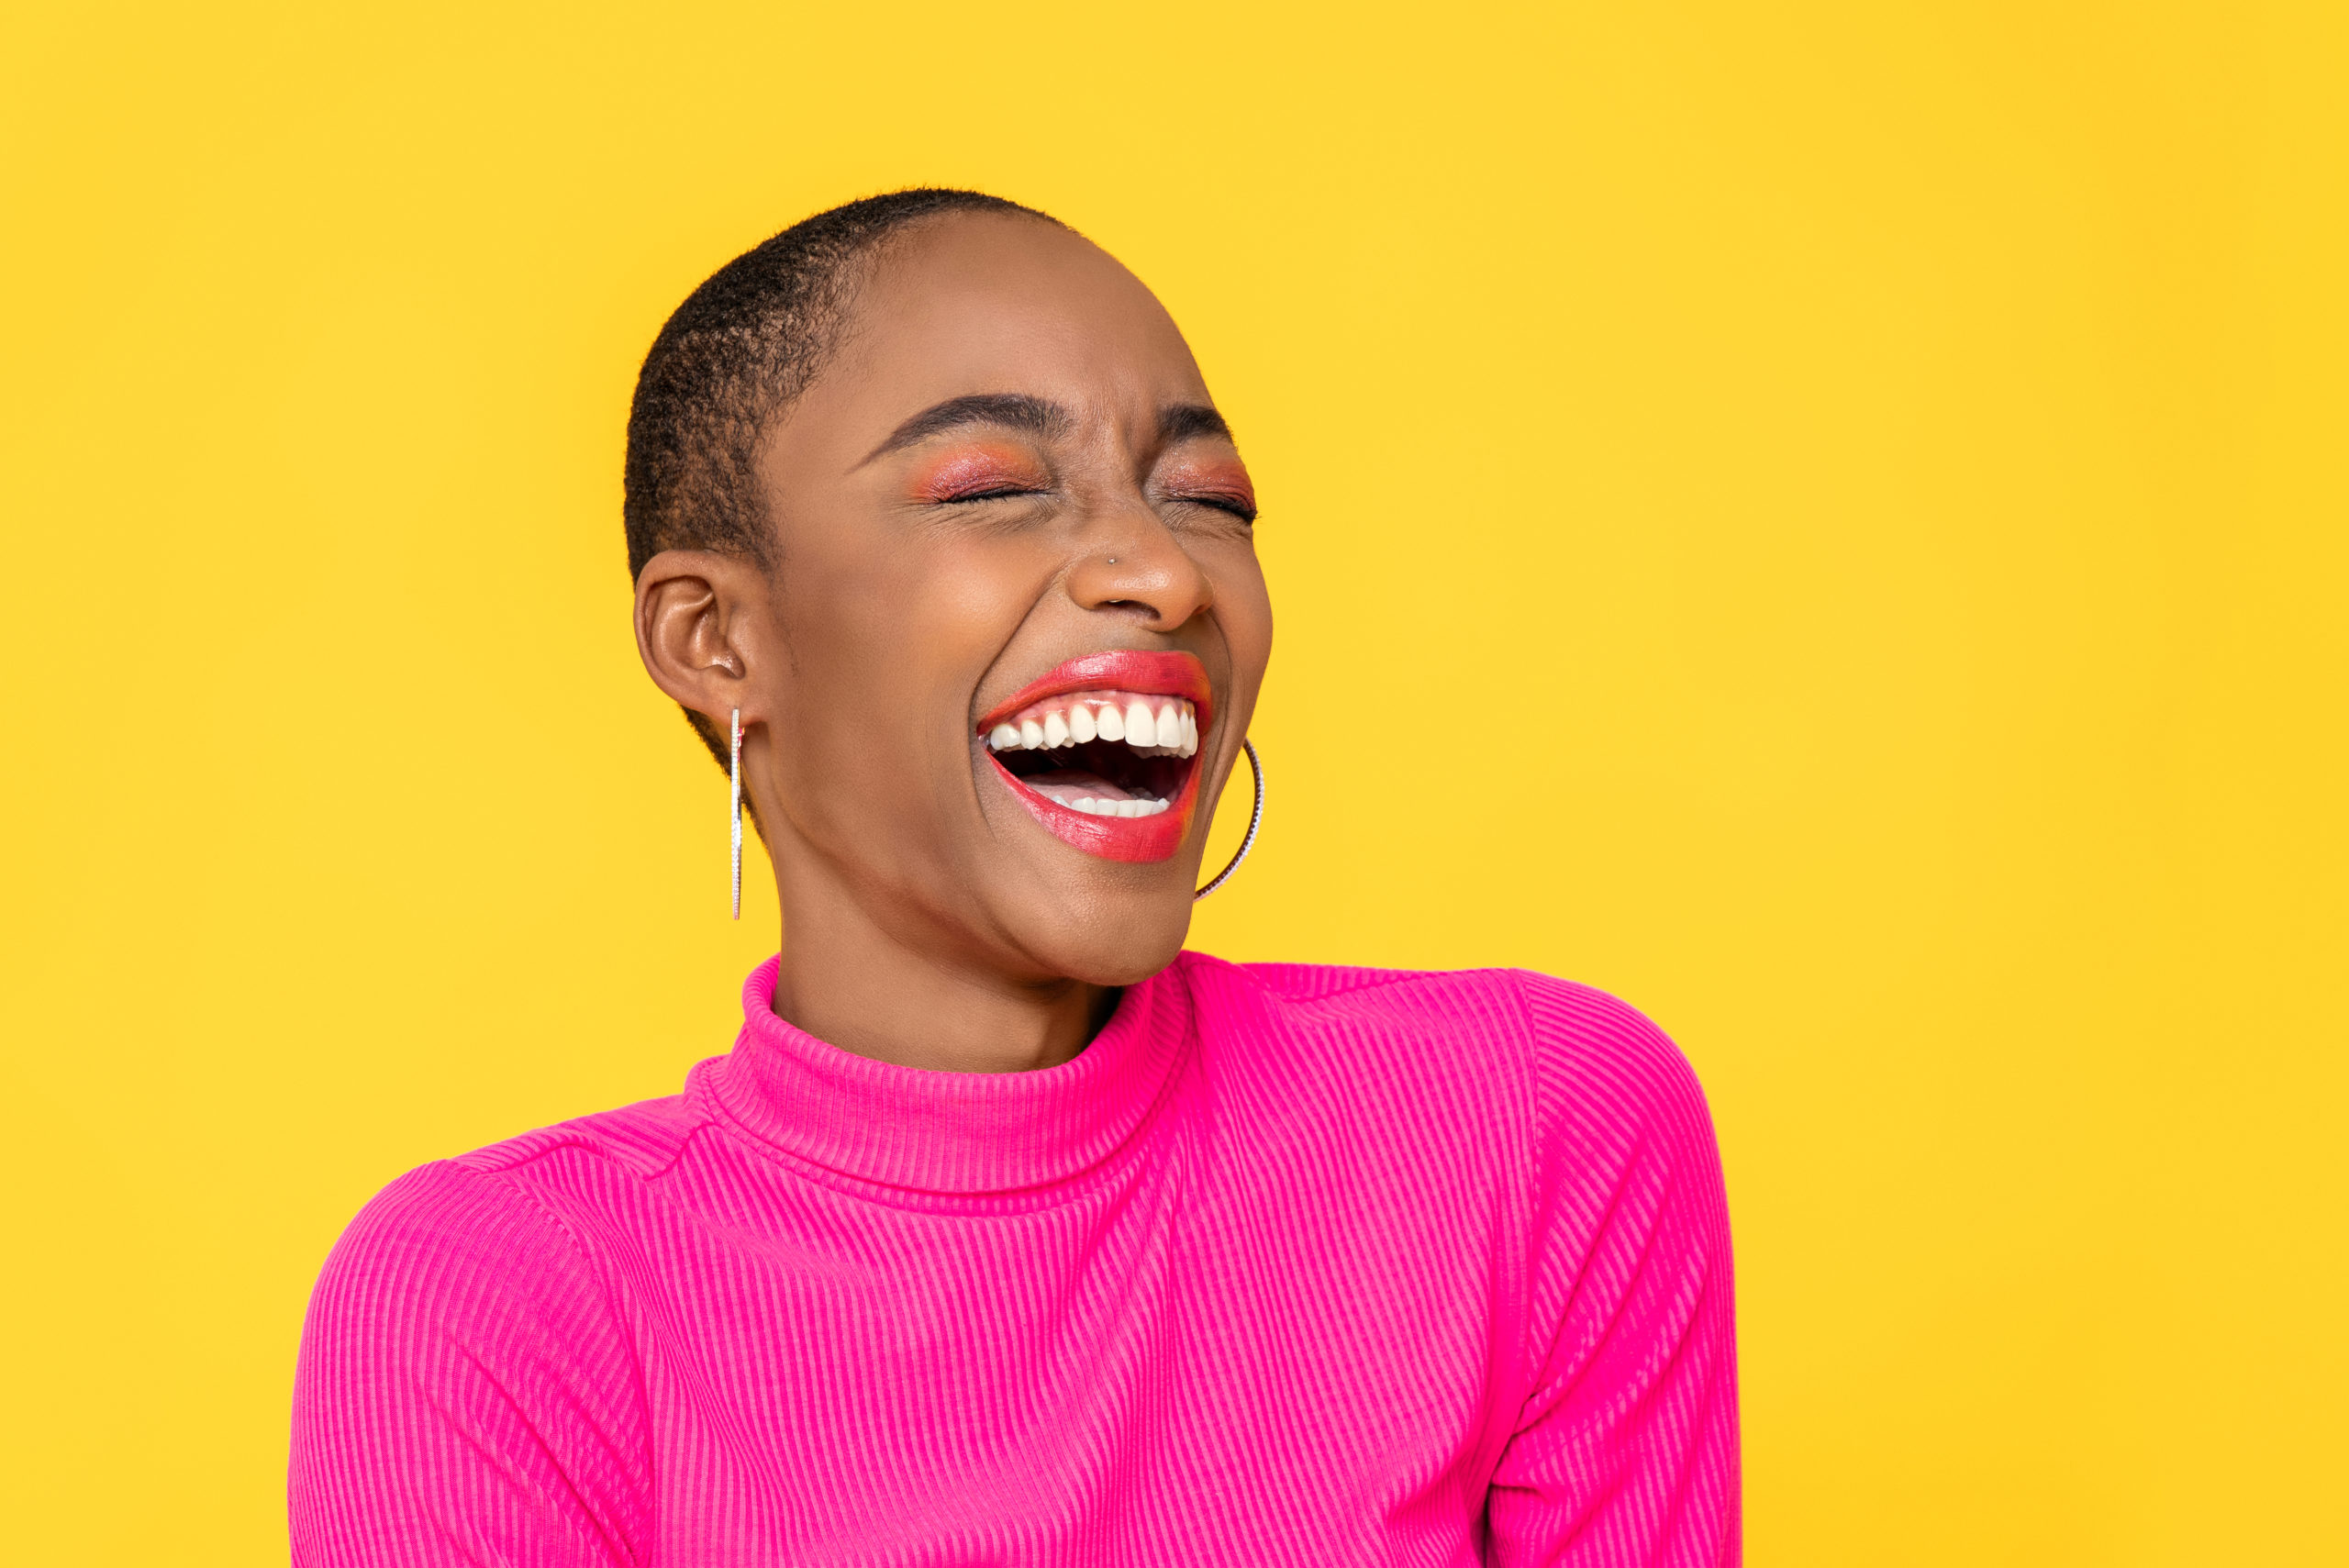 Women in a pink shirt laughing in front of a yellow background